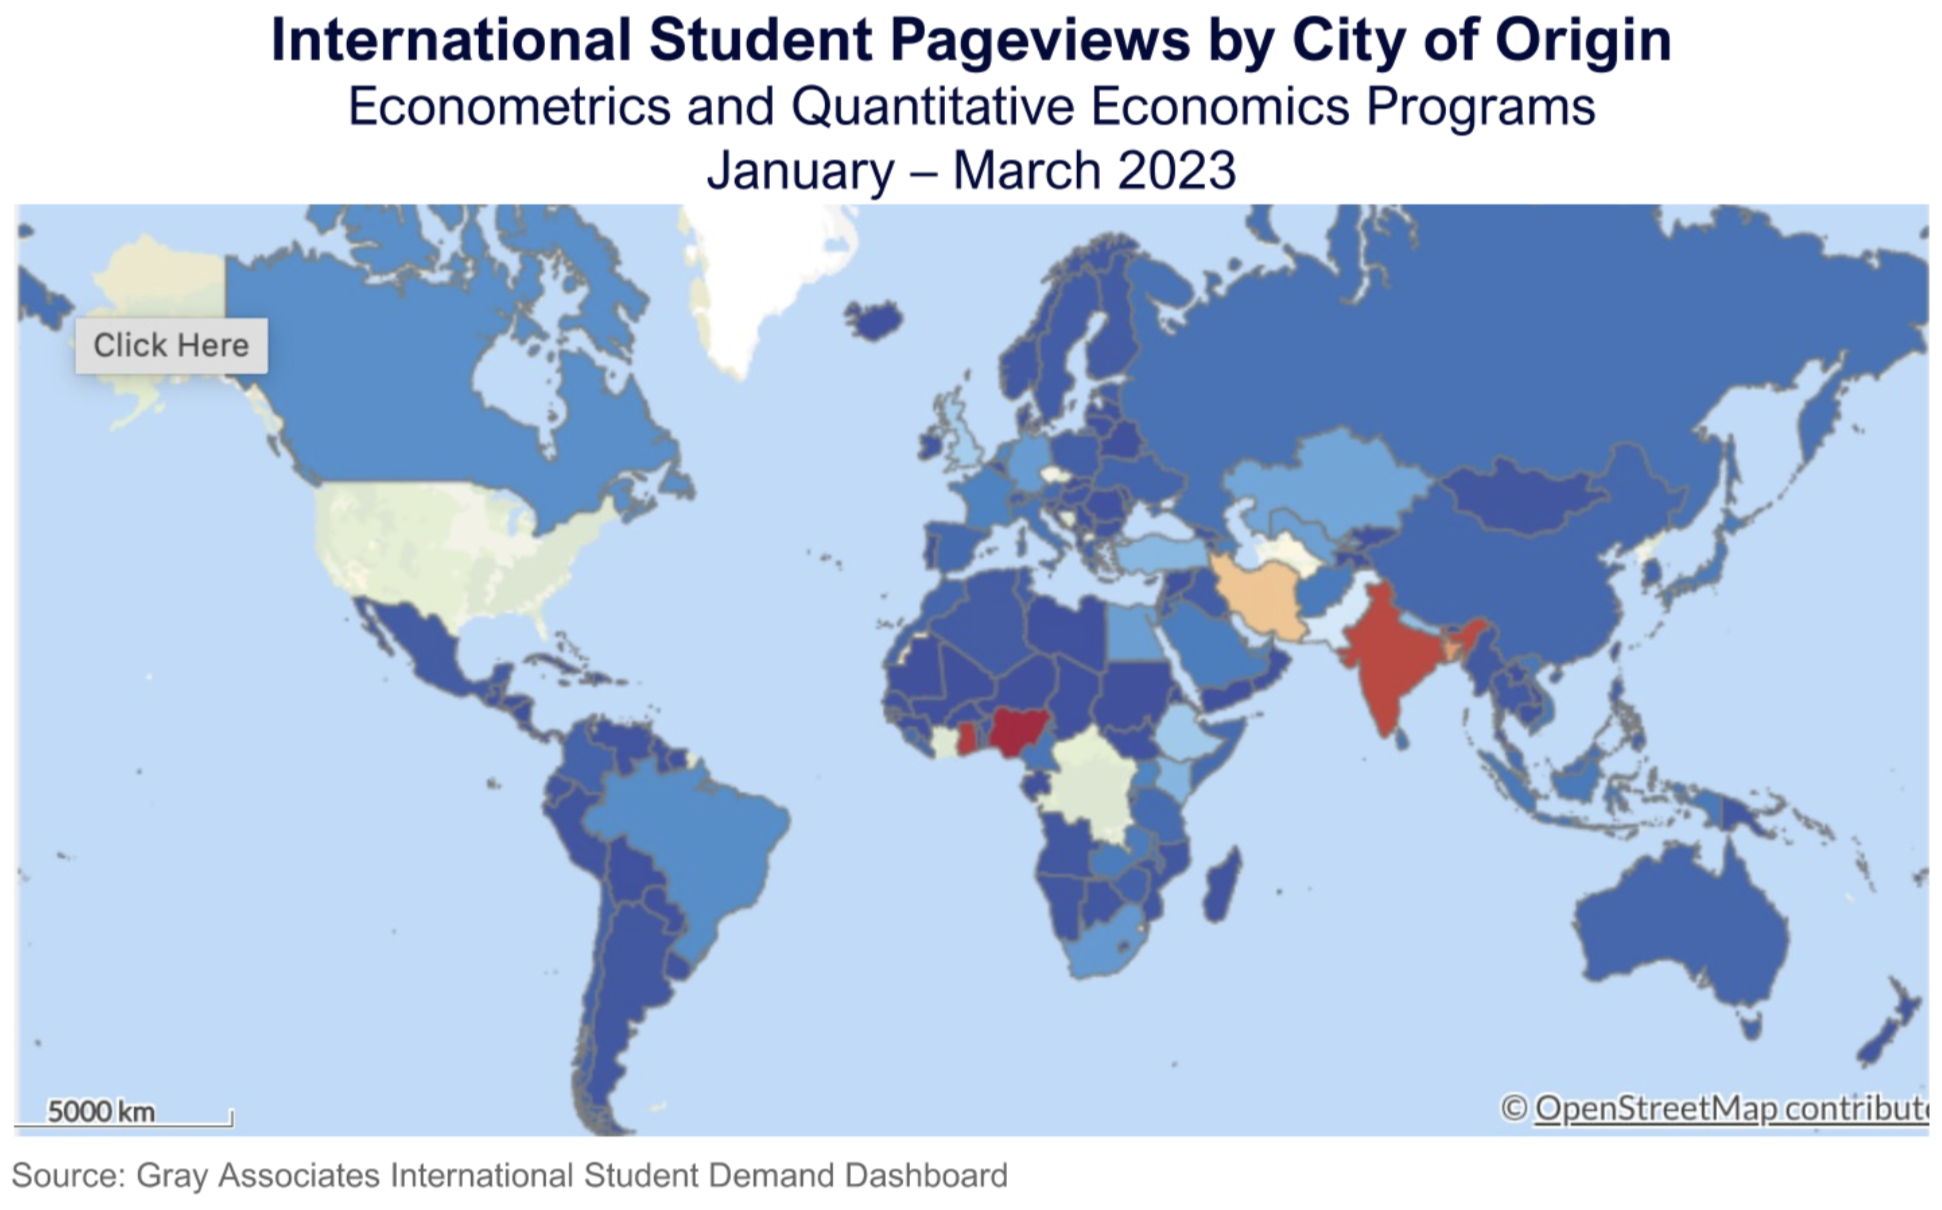 International Student Pageviews by City of Origin